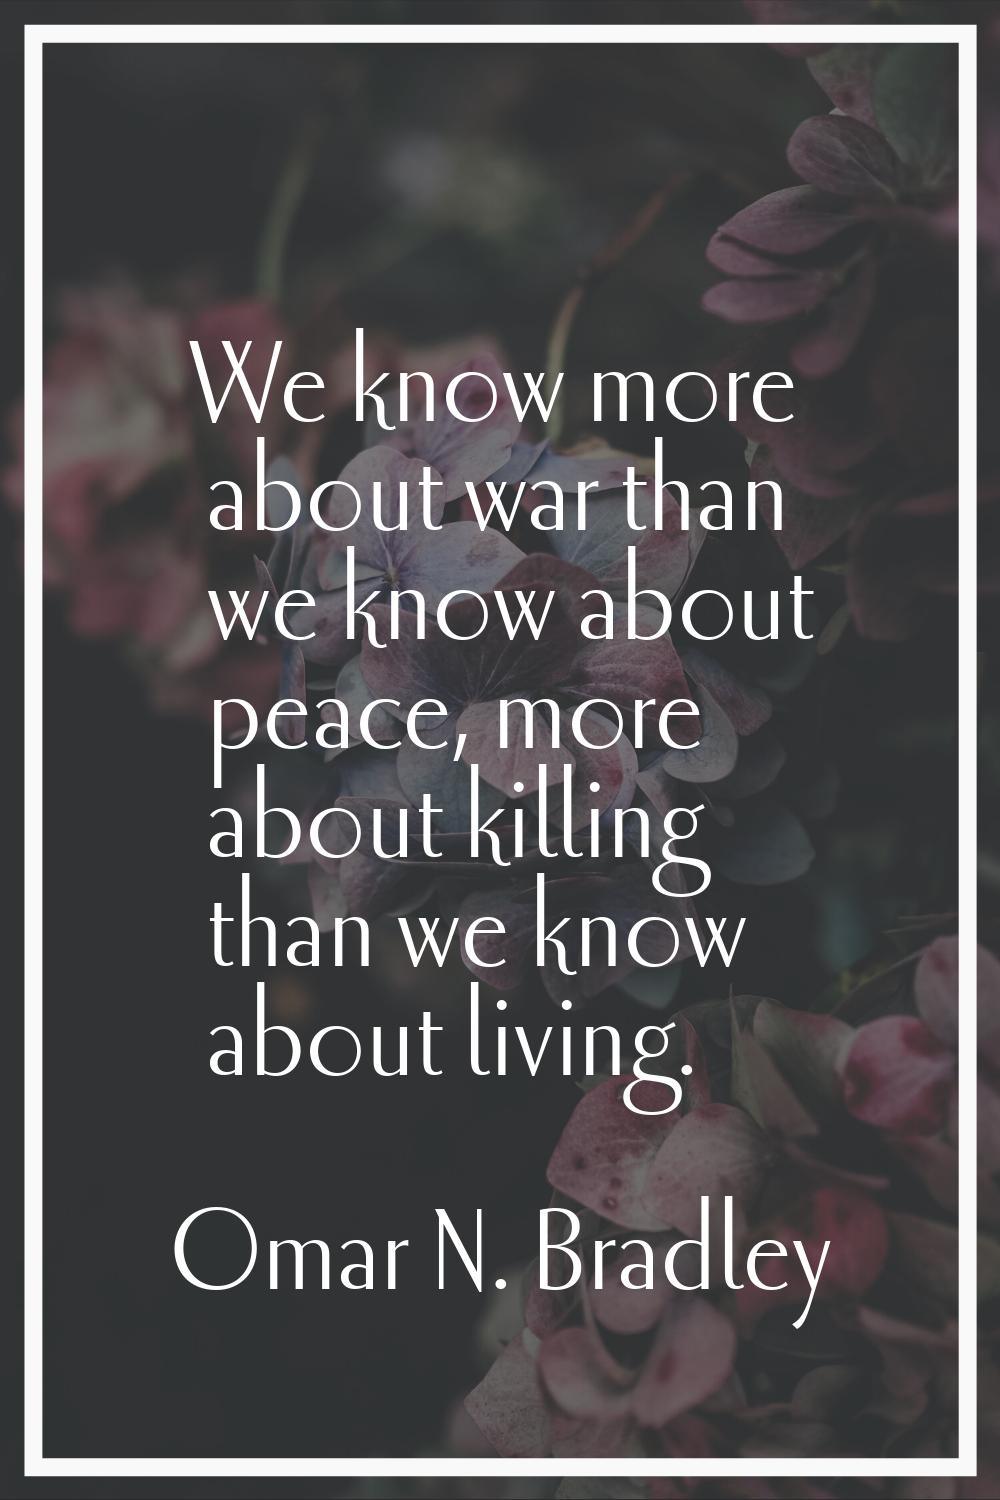 We know more about war than we know about peace, more about killing than we know about living.